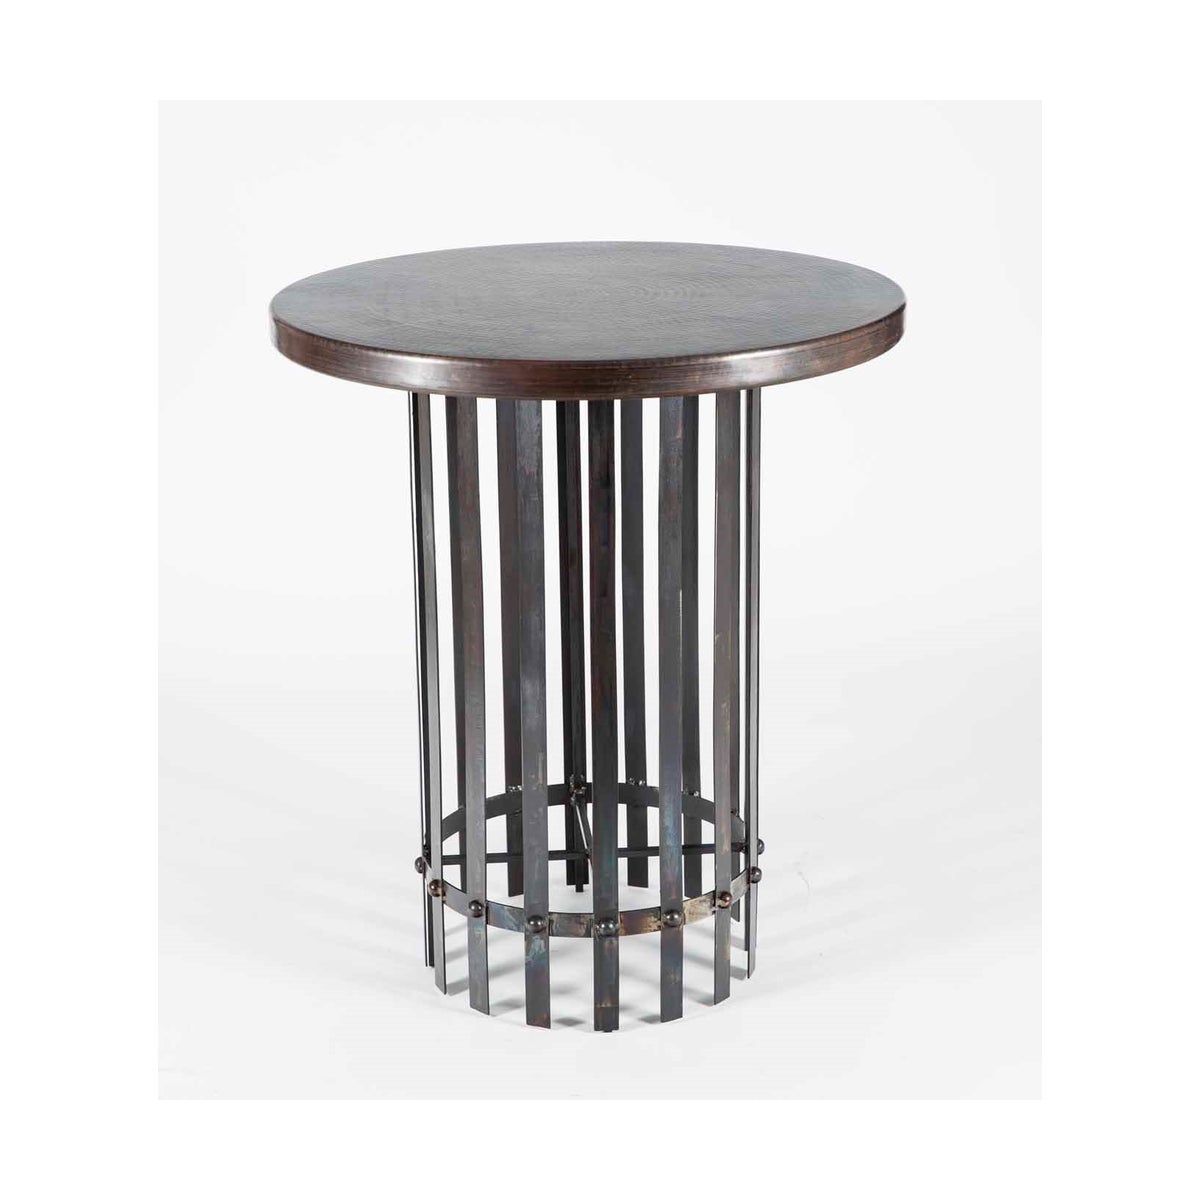 Ashton Counter Table with 36" Round Dark Brown Hammered Copper Top